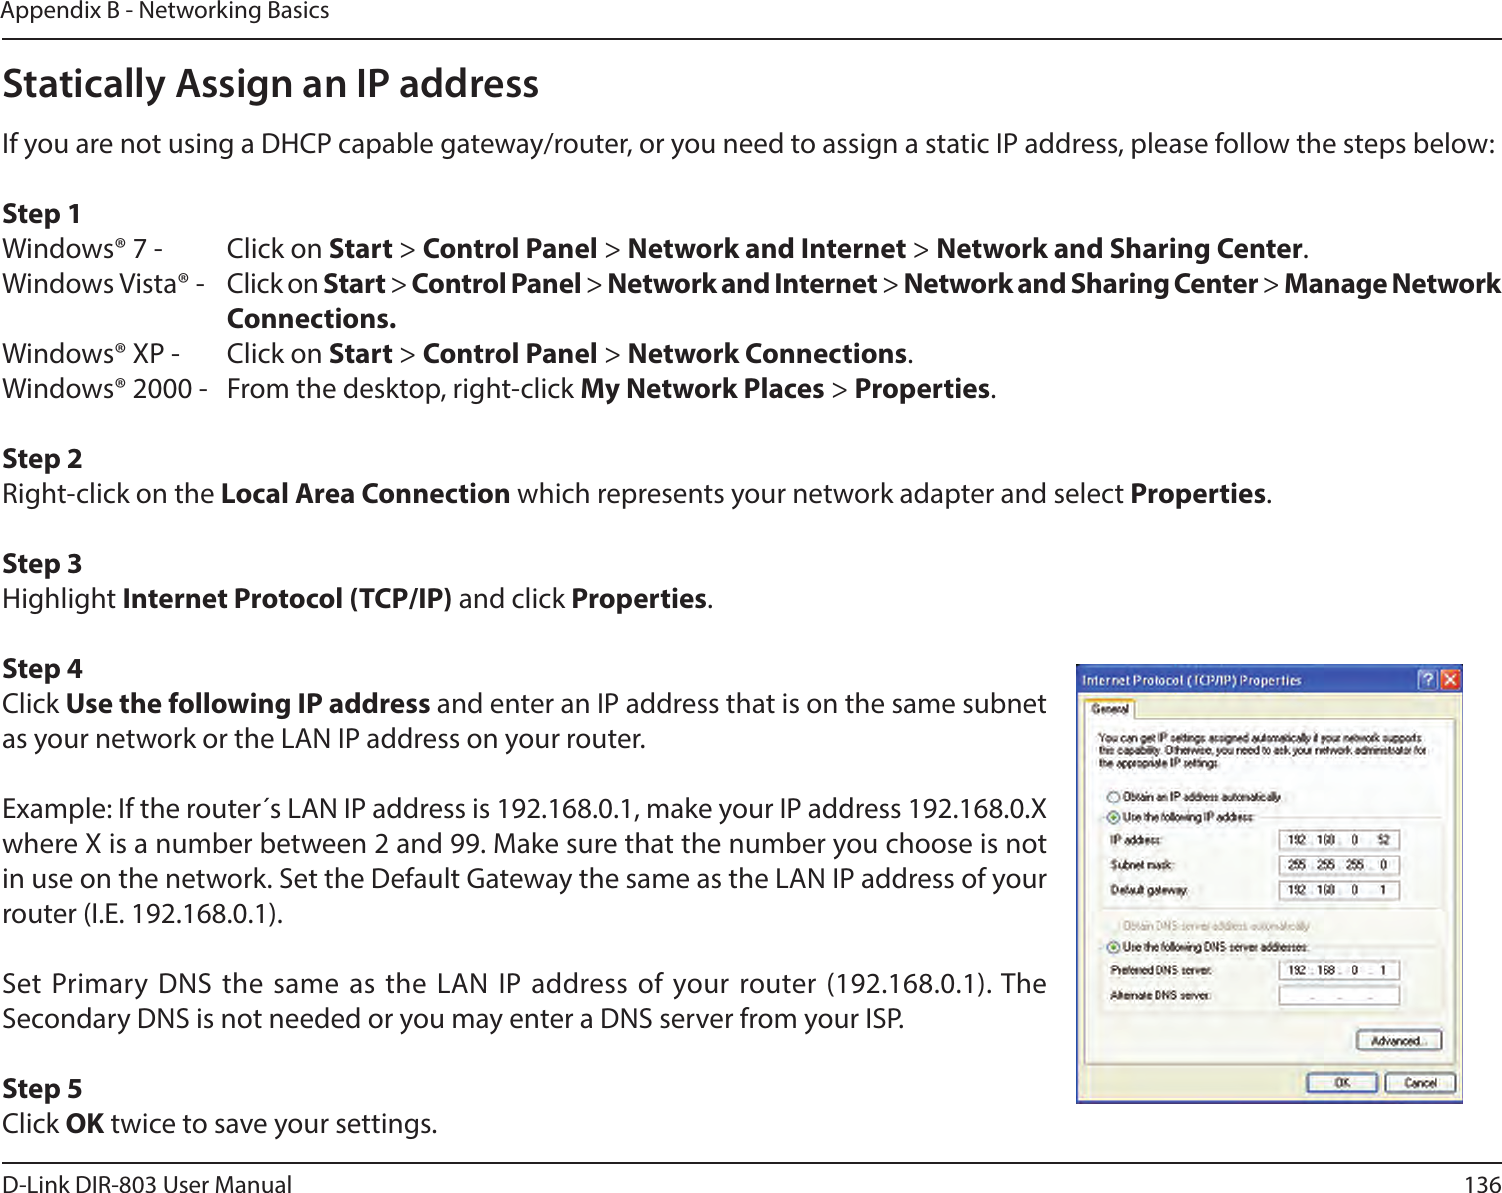 136D-Link DIR-803 User ManualAppendix B - Networking BasicsStatically Assign an IP addressIf you are not using a DHCP capable gateway/router, or you need to assign a static IP address, please follow the steps below:Step 1Windows® 7 -  Click on Start &gt; Control Panel &gt; Network and Internet &gt; Network and Sharing Center.Windows Vista® -  Click on Start &gt; Control Panel &gt; Network and Internet &gt; Network and Sharing Center &gt; Manage Network    Connections.Windows® XP -  Click on Start &gt; Control Panel &gt; Network Connections.Windows® 2000 -  From the desktop, right-click My Network Places &gt; Properties.Step 2Right-click on the Local Area Connection which represents your network adapter and select Properties.Step 3Highlight Internet Protocol (TCP/IP) and click Properties.Step 4Click Use the following IP address and enter an IP address that is on the same subnet as your network or the LAN IP address on your router. Example: If the router´s LAN IP address is 192.168.0.1, make your IP address 192.168.0.X where X is a number between 2 and 99. Make sure that the number you choose is not in use on the network. Set the Default Gateway the same as the LAN IP address of your router (I.E. 192.168.0.1). Set Primary DNS the same as the LAN IP address of your router (192.168.0.1). The Secondary DNS is not needed or you may enter a DNS server from your ISP.Step 5Click OK twice to save your settings.